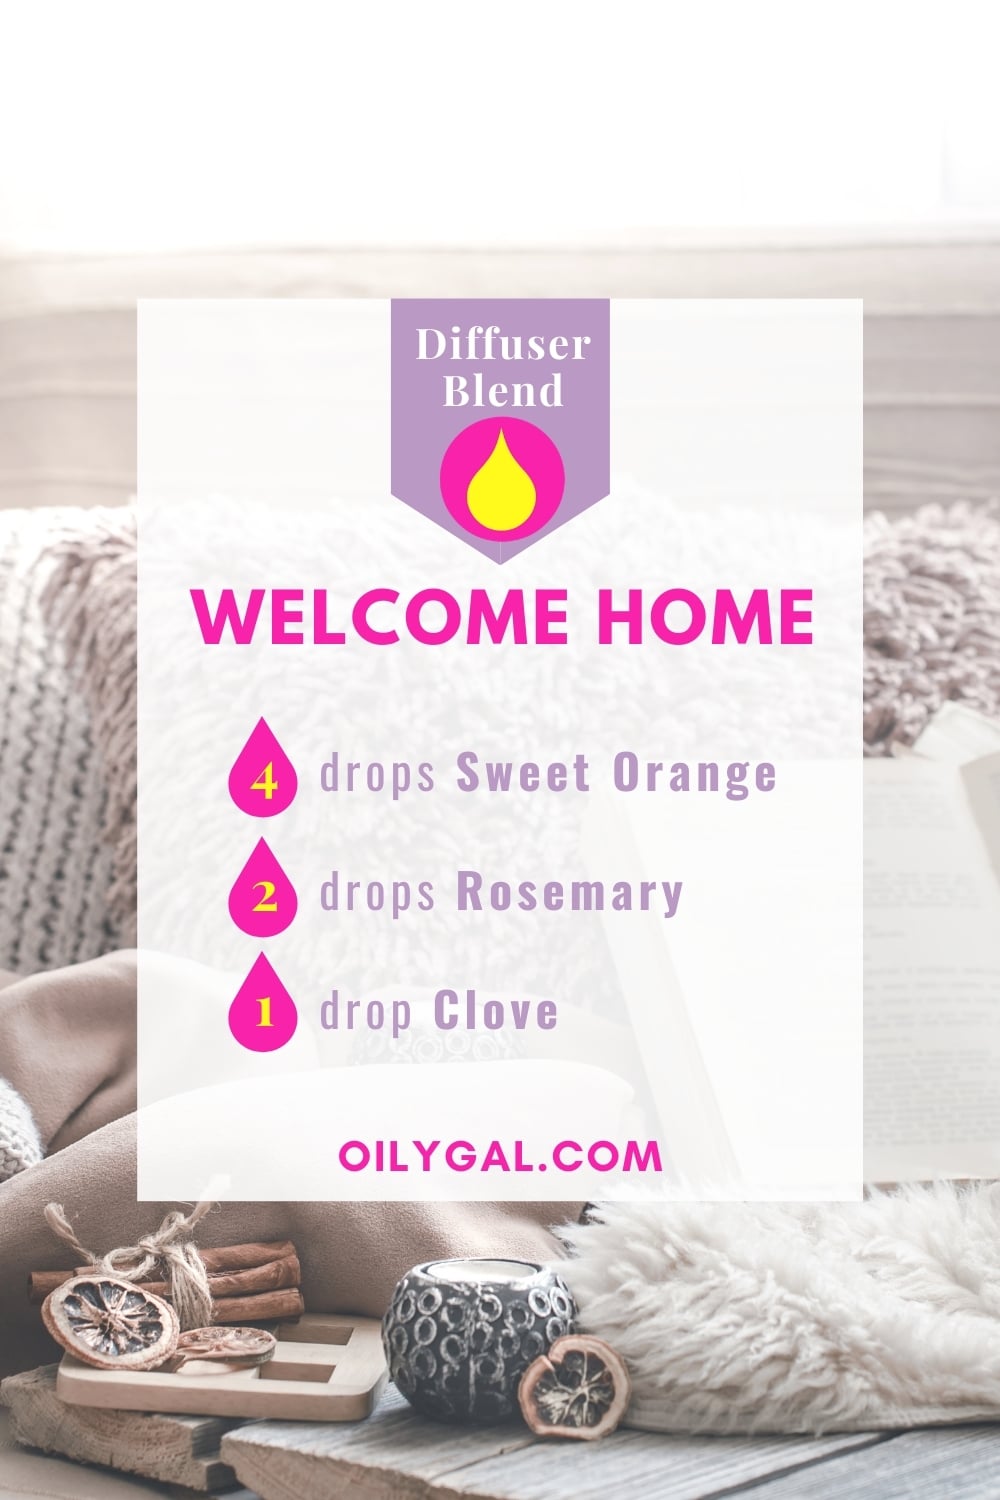 Welcome Home Diffuser Blend